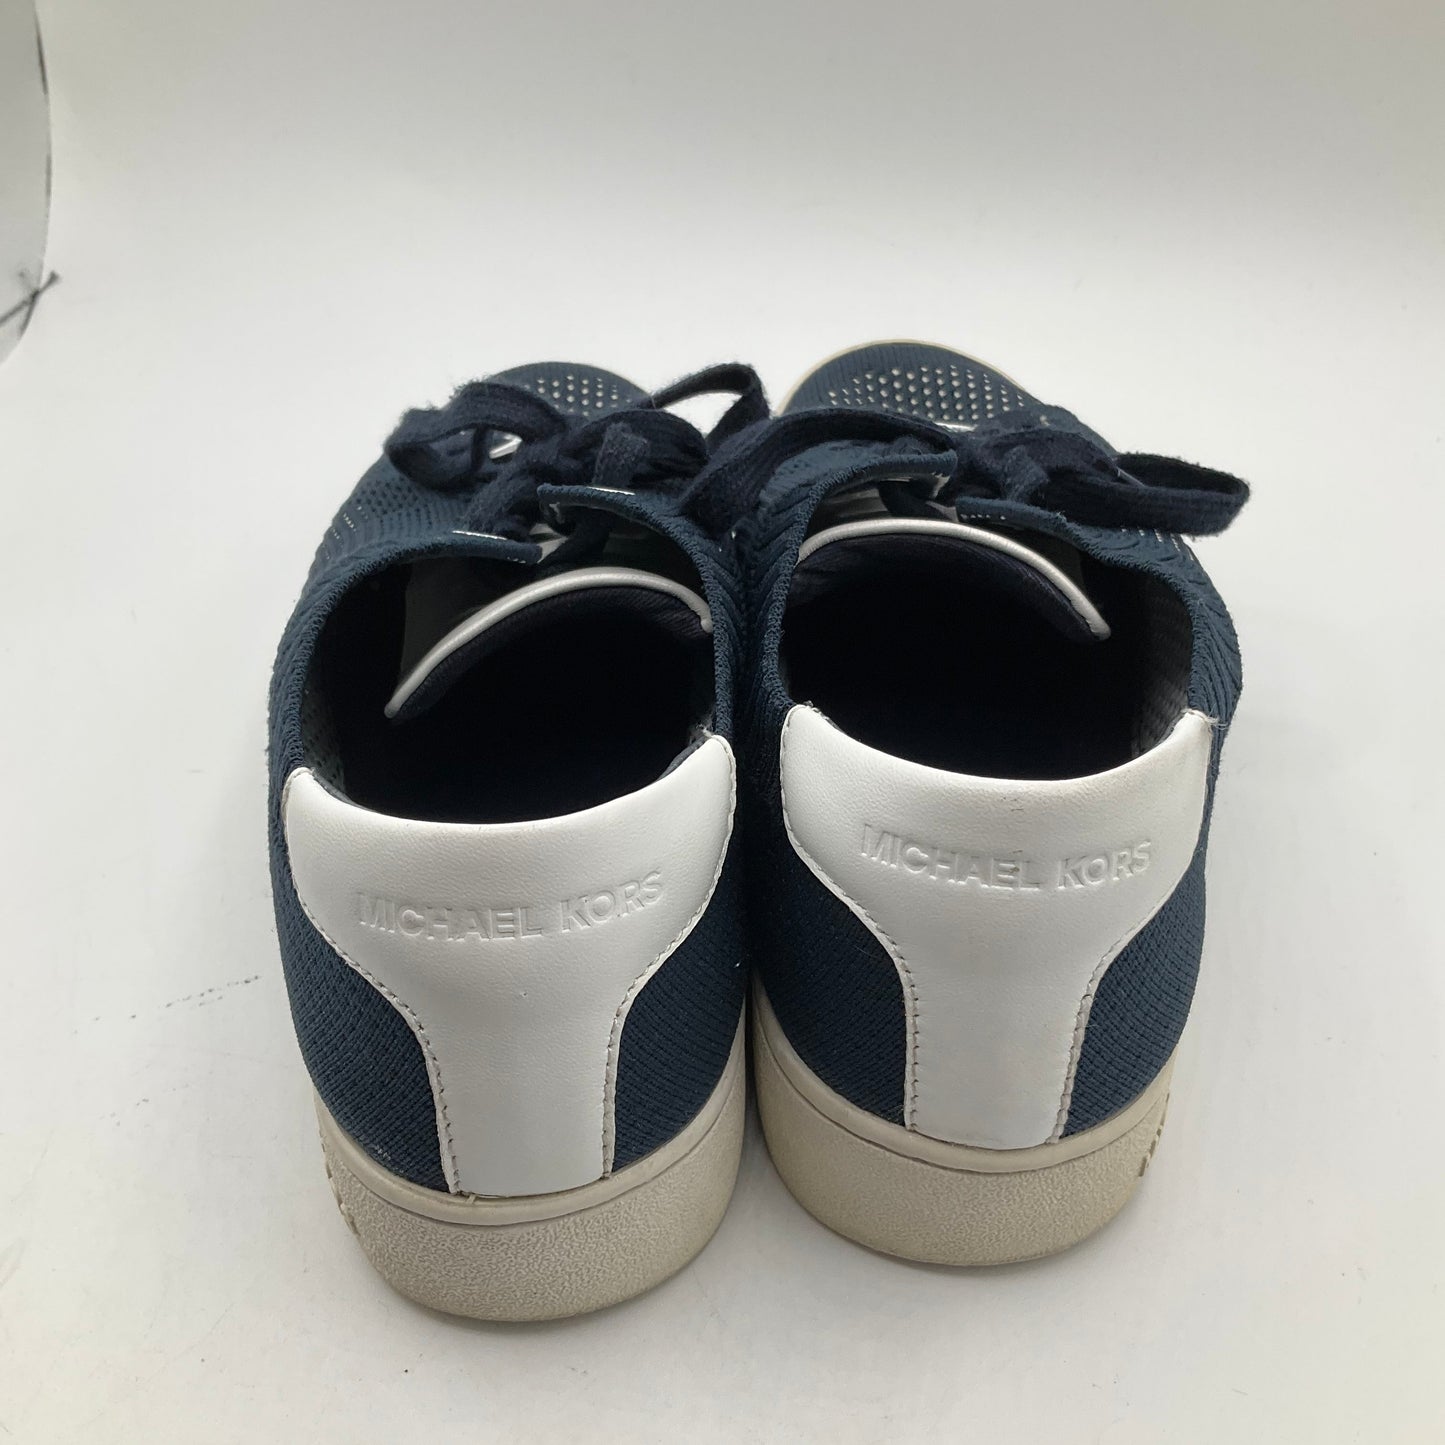 Blue Shoes Sneakers Michael By Michael Kors, Size 6